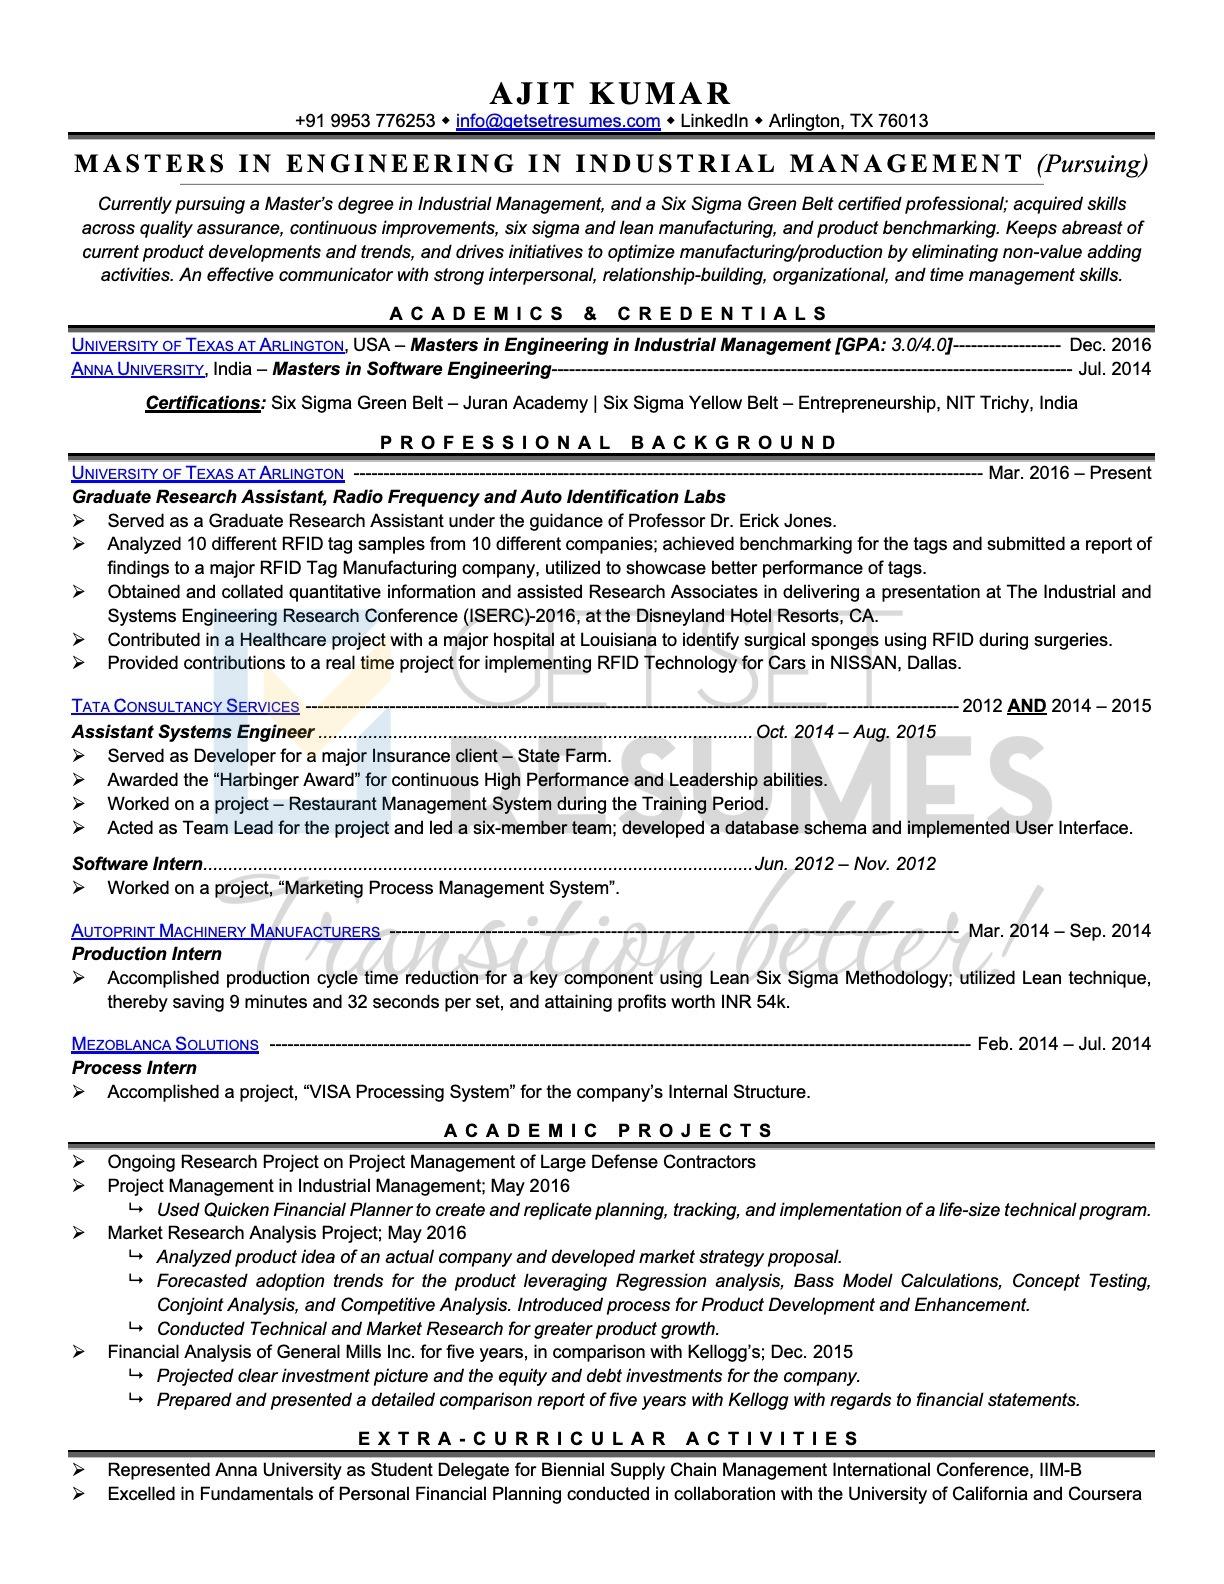 Sample Resume of Graduate Research Assistant & MS Engineering from Texas USA by getsetresumes